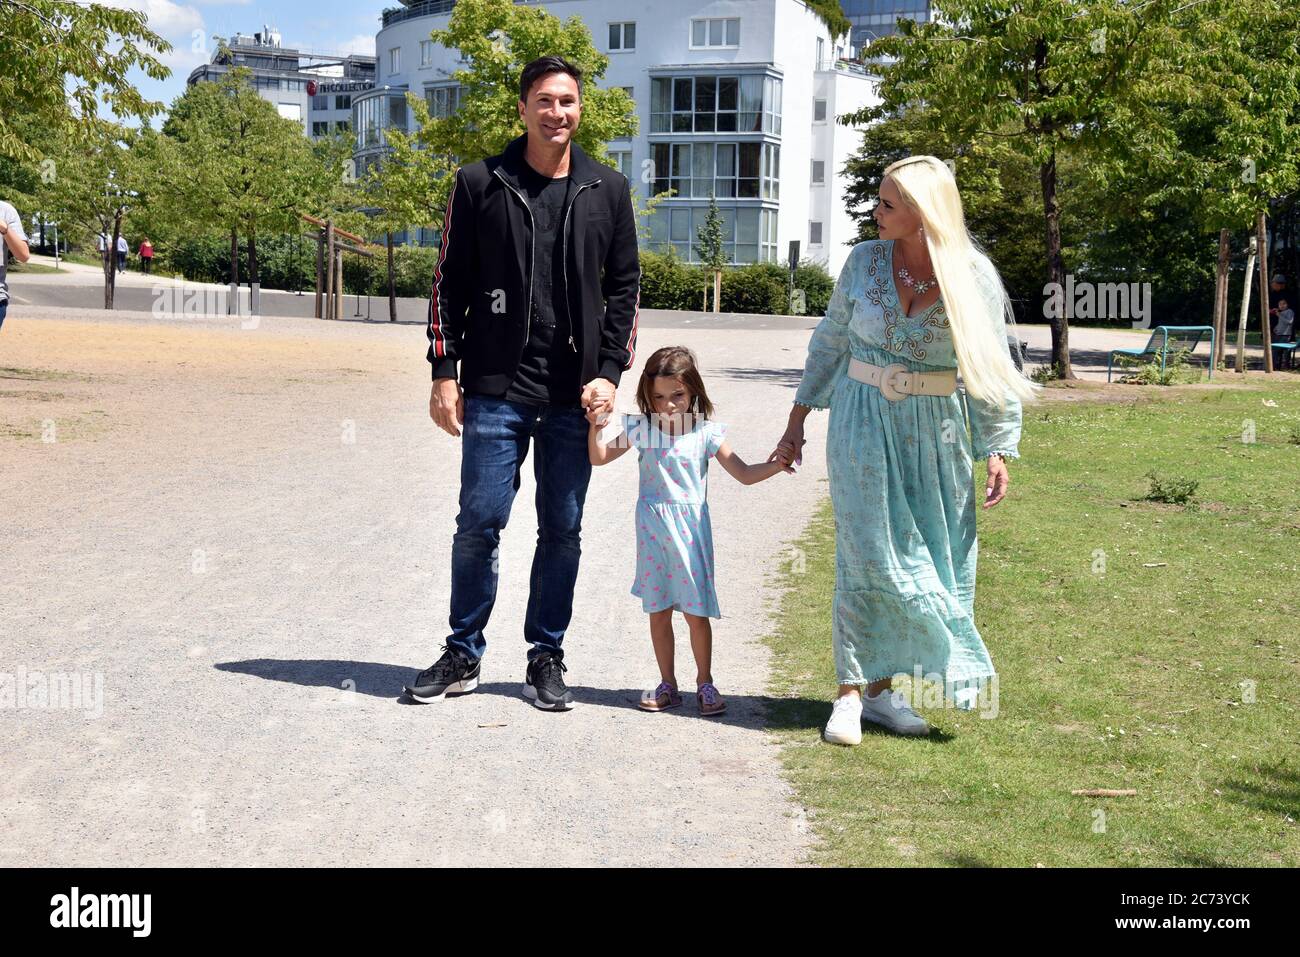 Cologne, Germany. 13th July, 2020. Daniela Katzenberger, her husband Lucas Cordalis and daughter Sophia present their new book " Mutti Mafia kann mich mal.gernhaben " on a playground Credit: Horst Galuschka/dpa/Alamy Live News Stock Photo